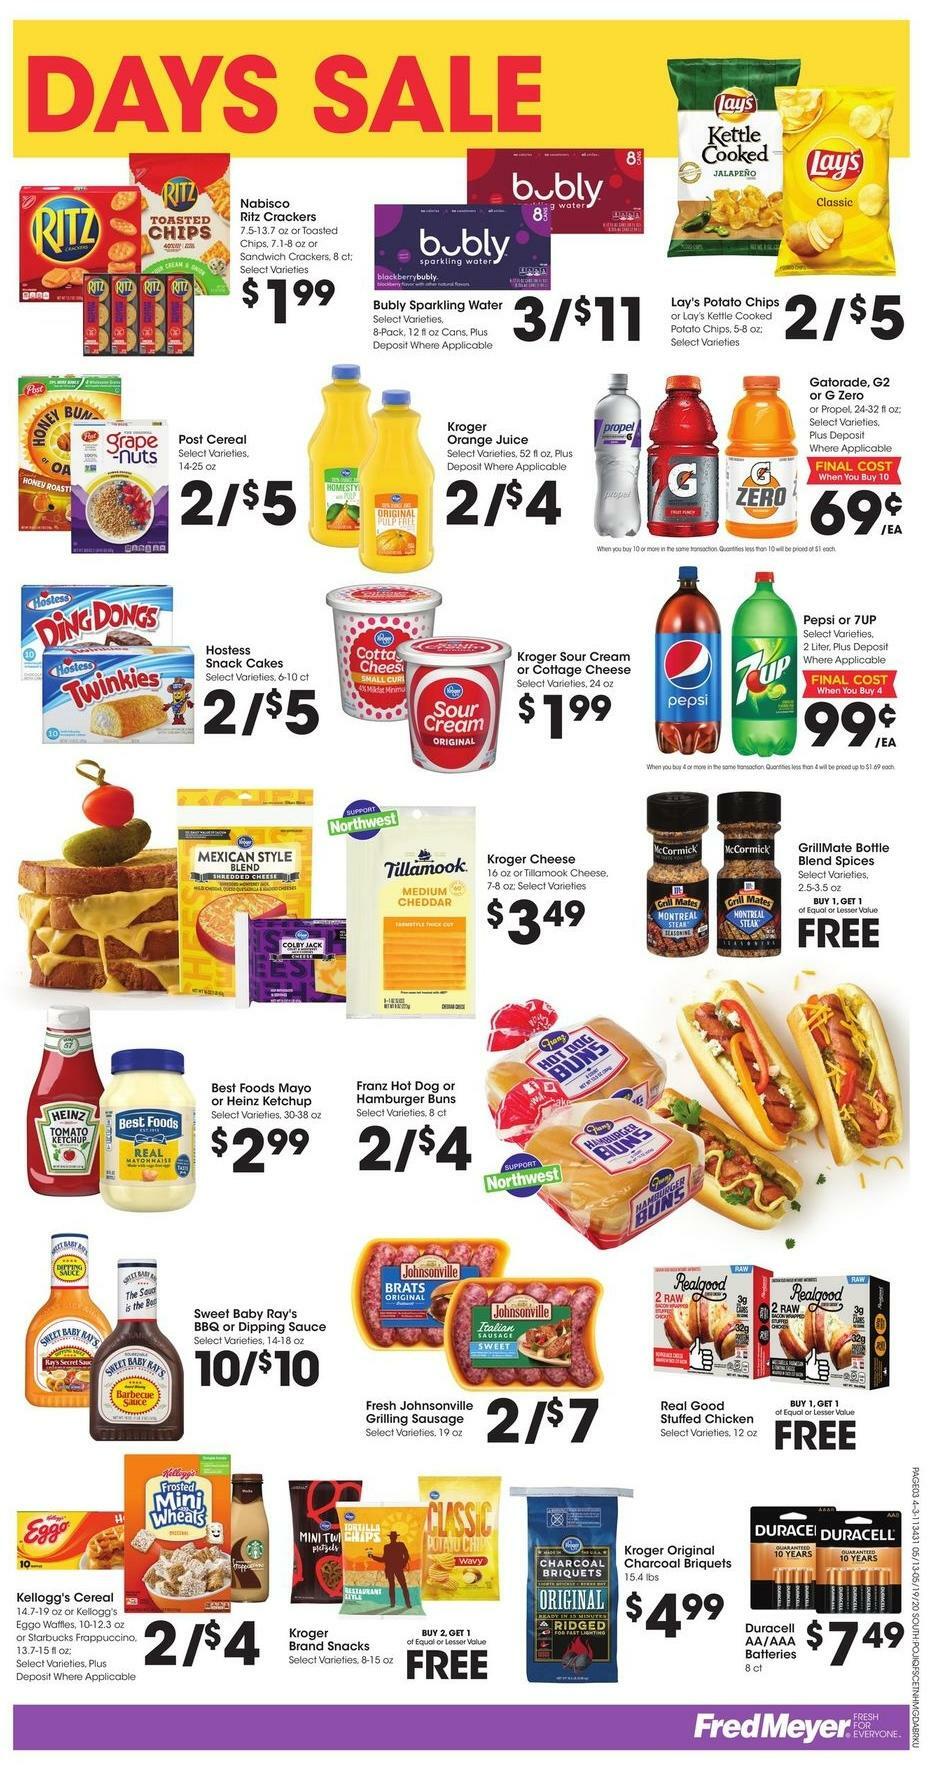 Fred Meyer Founder's Day Sale Weekly Ad & Specials from May 13 Page 3